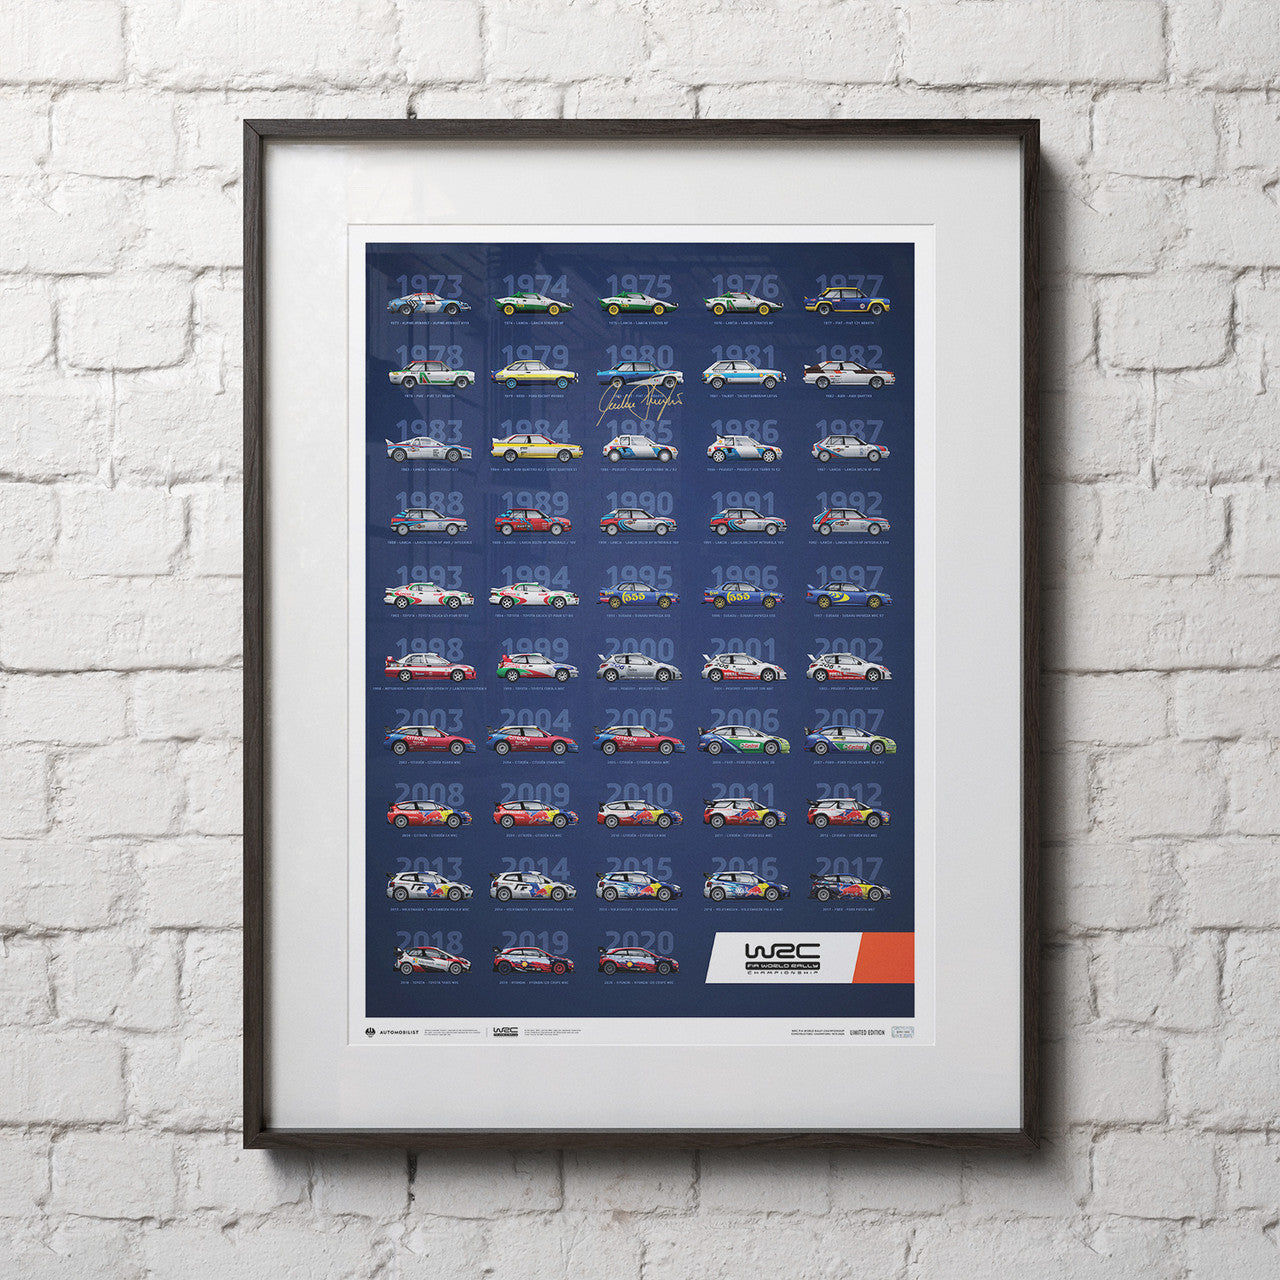 Christian Geistdörfer - WRC Constructors’ Champions 1973-2020 - 48th Anniversary | Signed Limited Edition